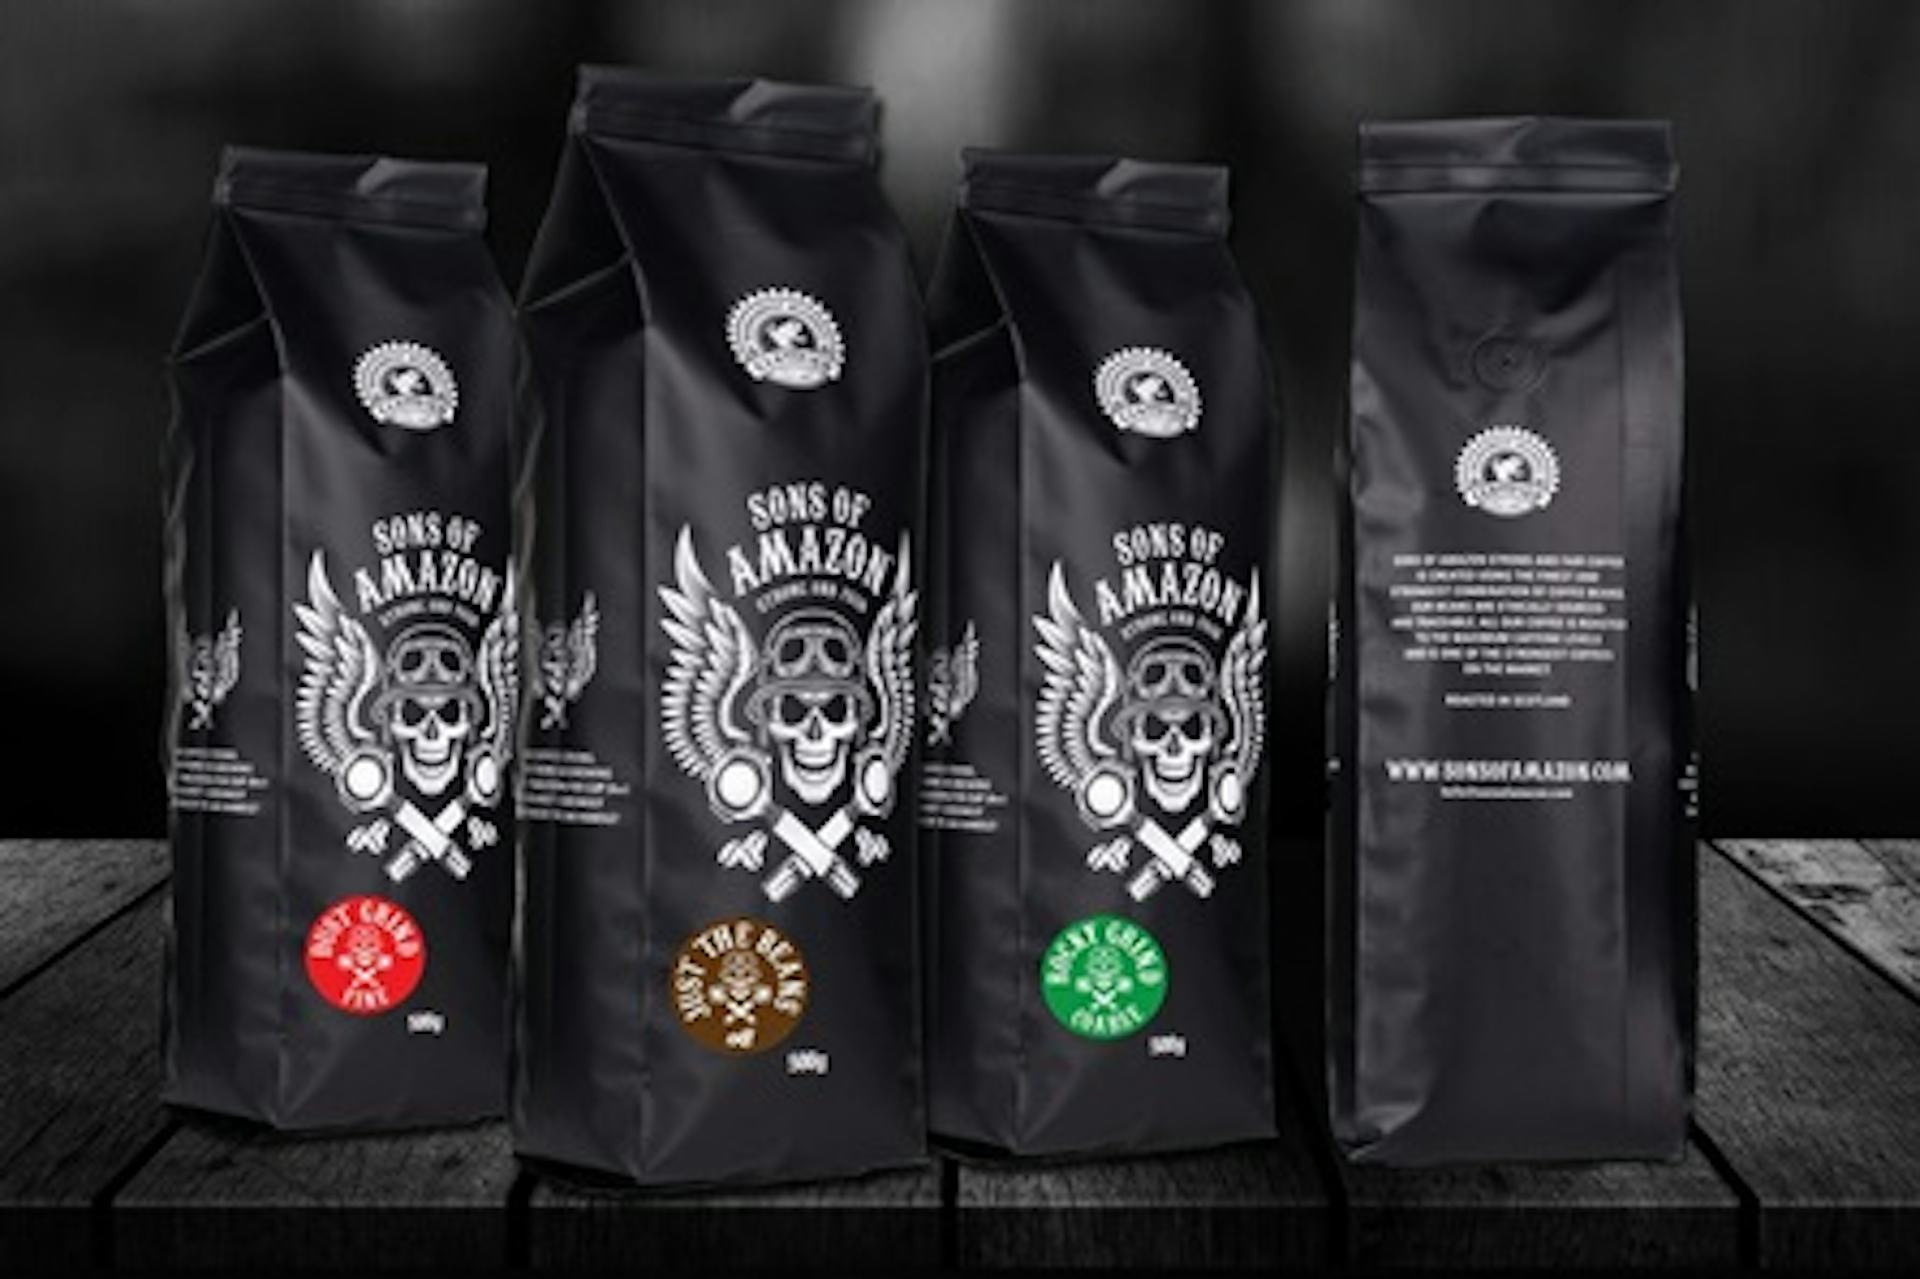 The UK's Strongest Coffee from The Sons of Amazon